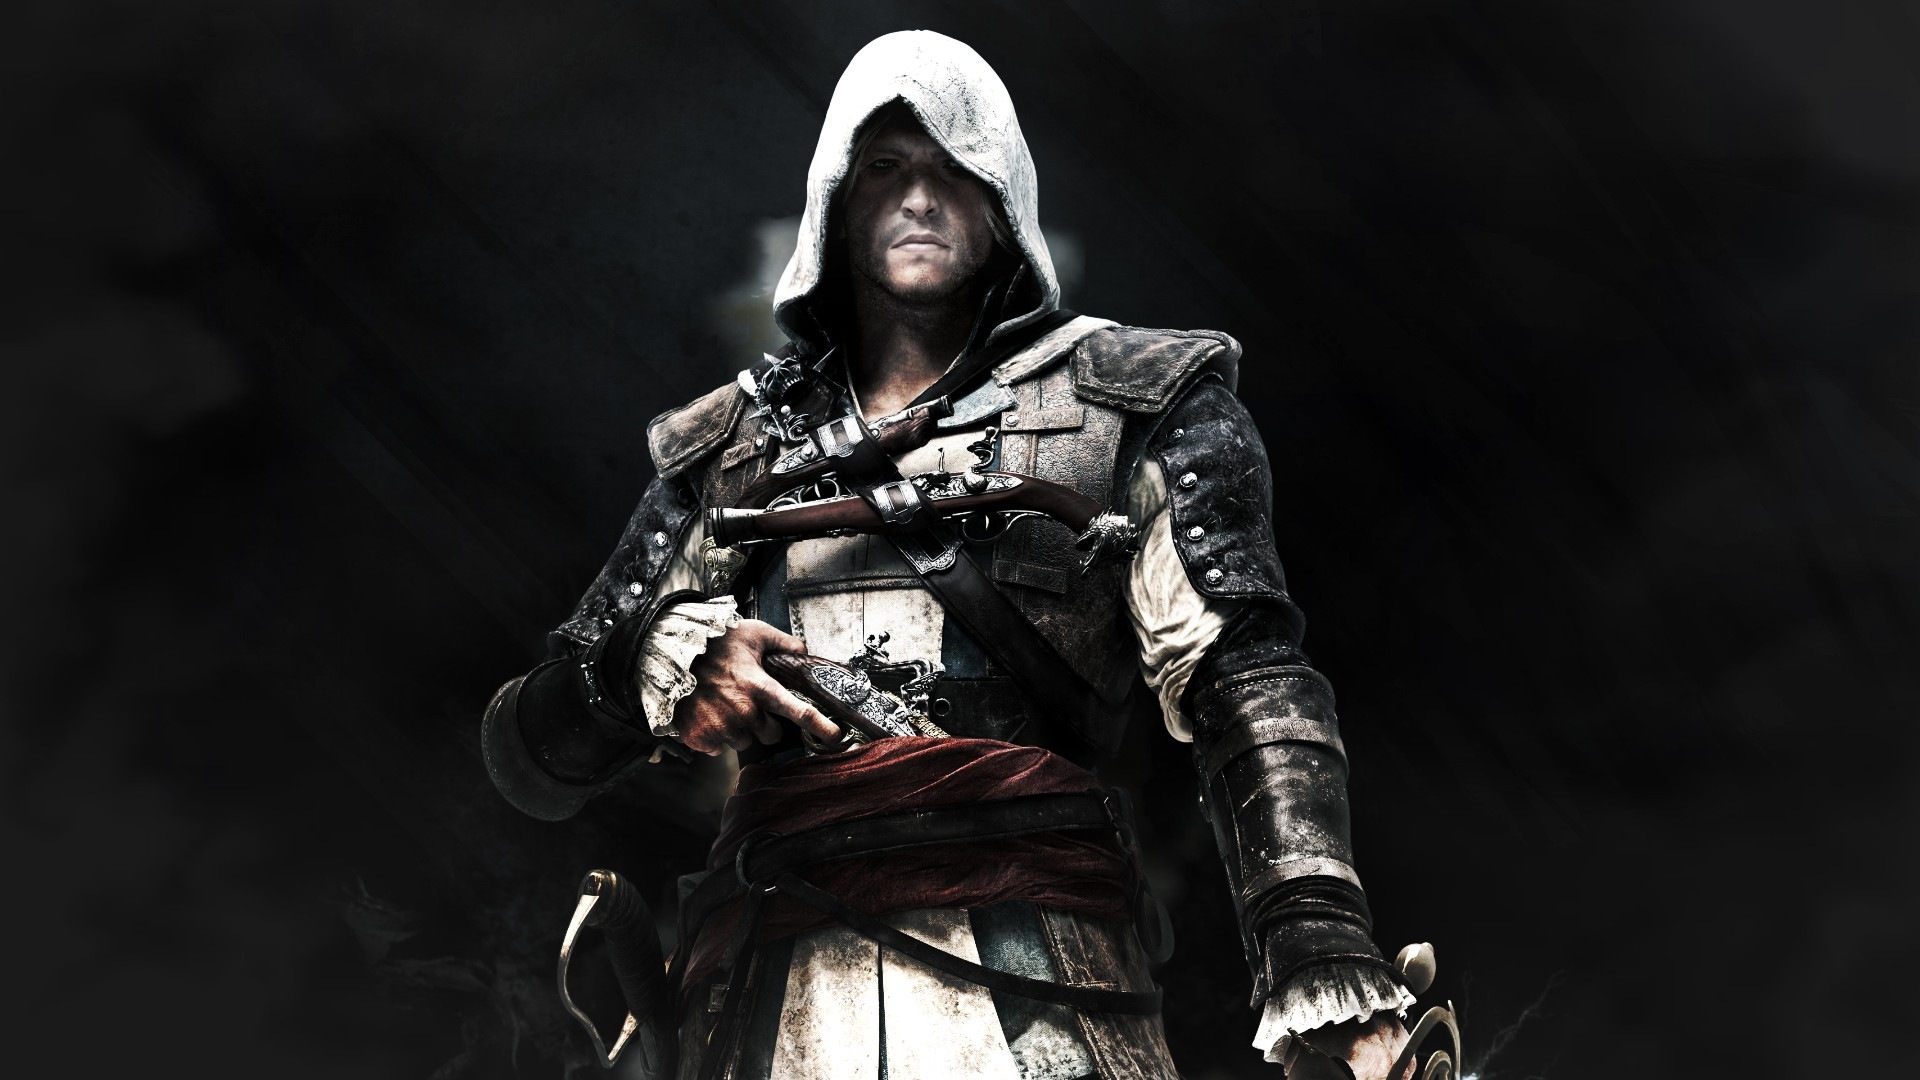 Creed IV Assassin: Black Flag HD wallpapers #10 - 1920x1080